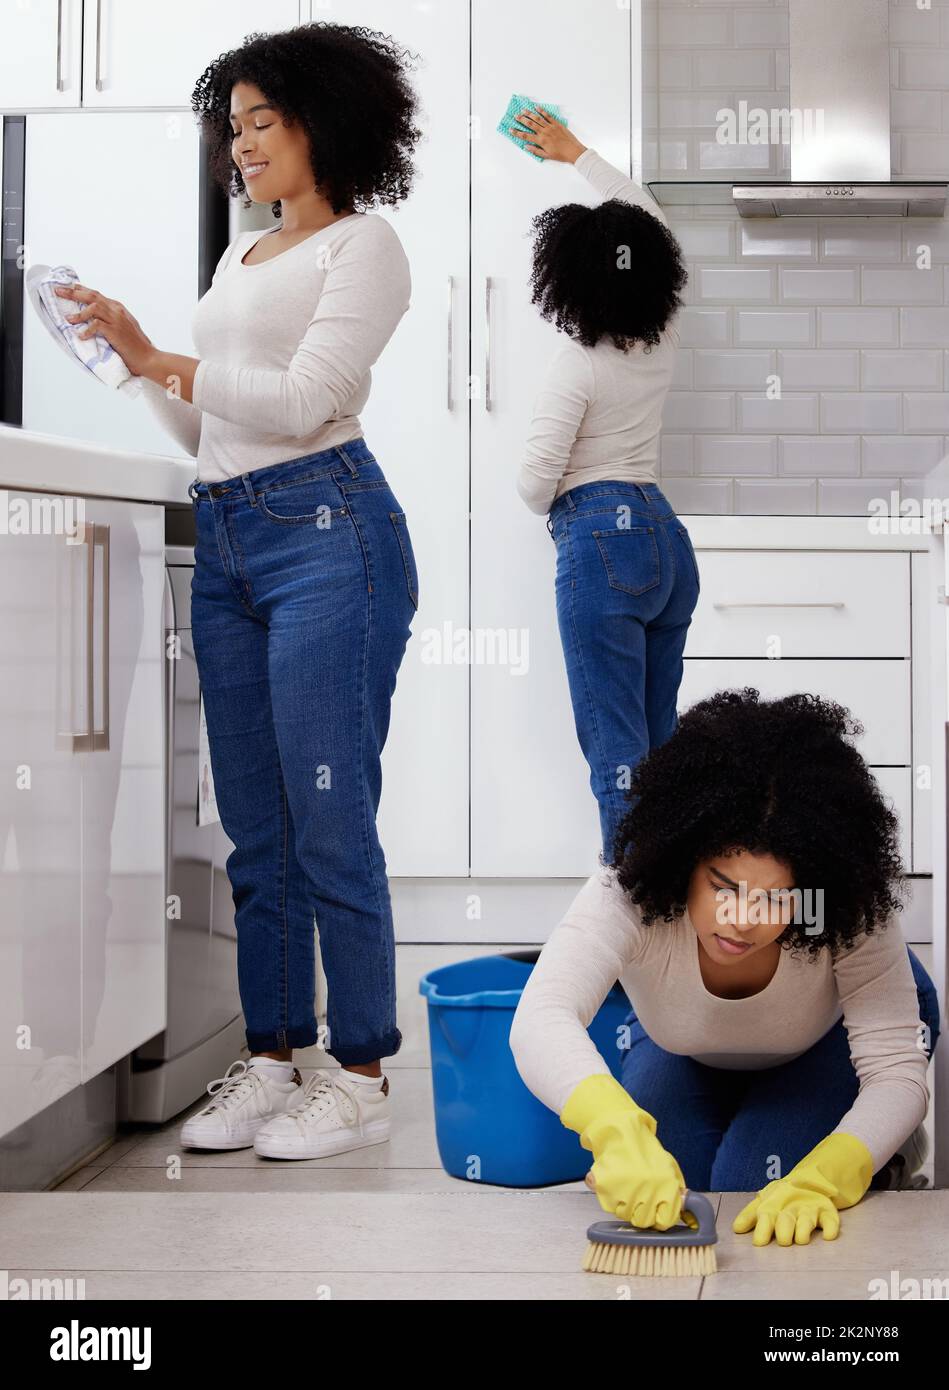 Todays a busy day. Shot of a young woman cleaning the house. Stock Photo